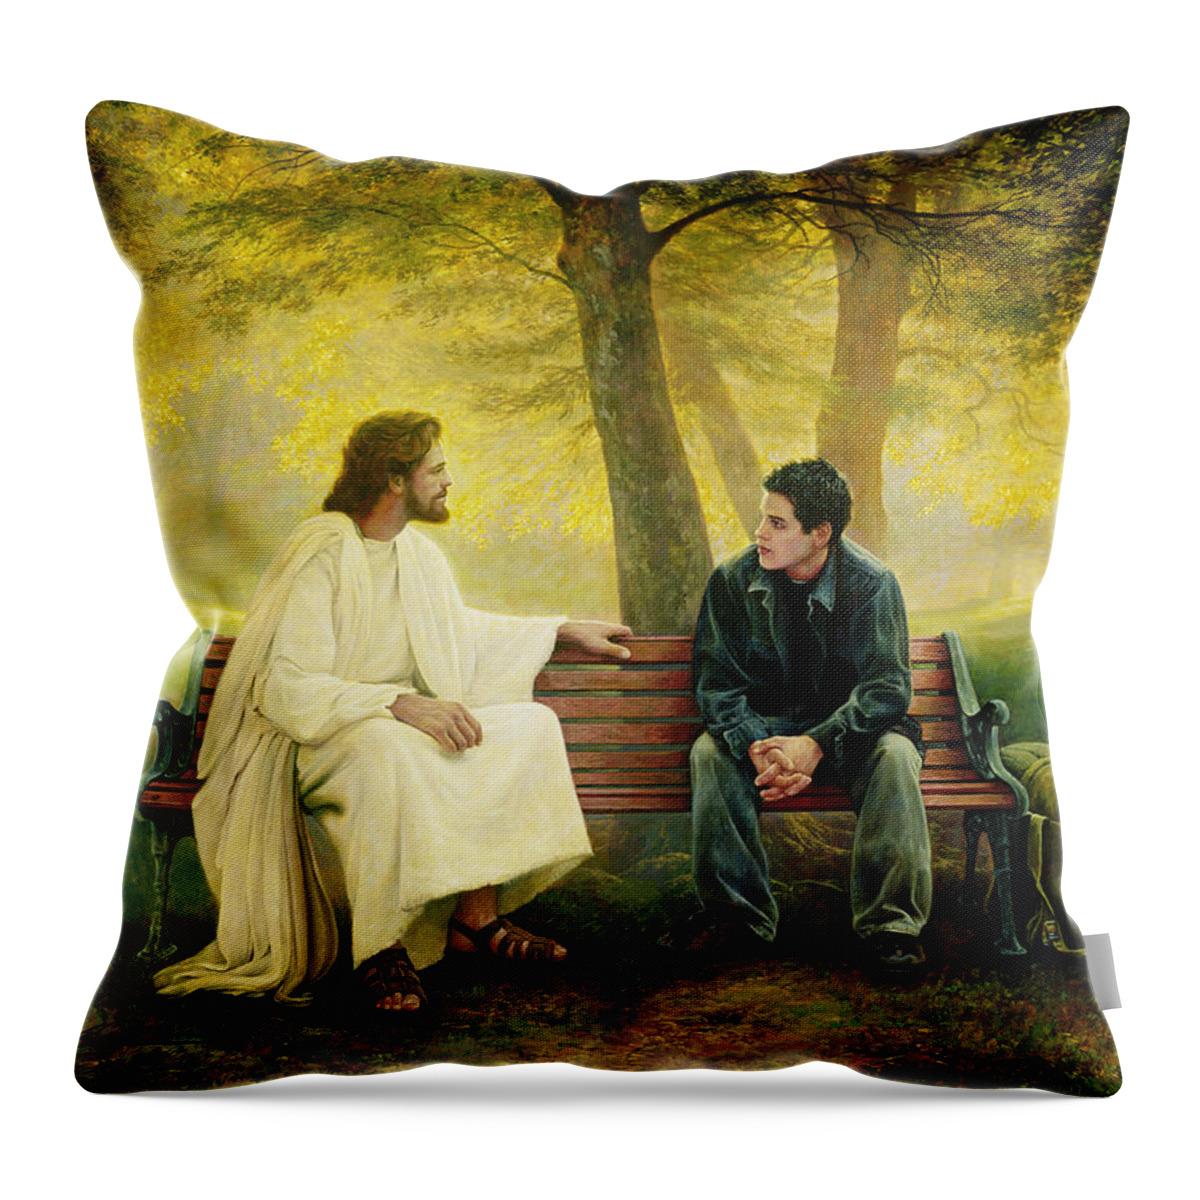 Jesus Throw Pillow featuring the painting Lost and Found by Greg Olsen